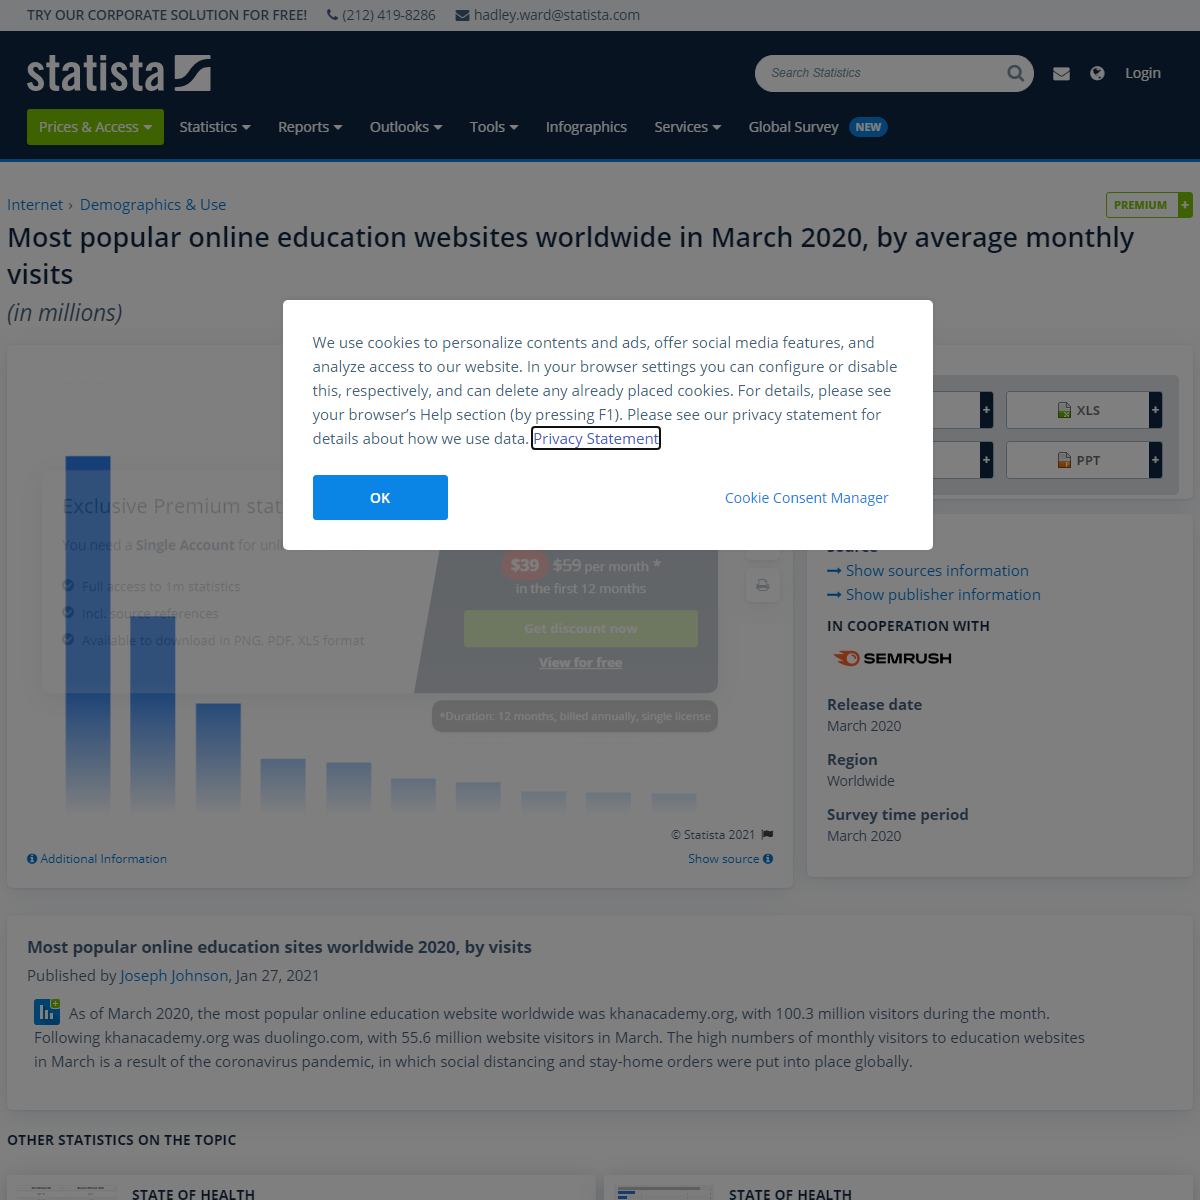 A complete backup of https://www.statista.com/statistics/1115218/most-popular-online-education-sites-globally/